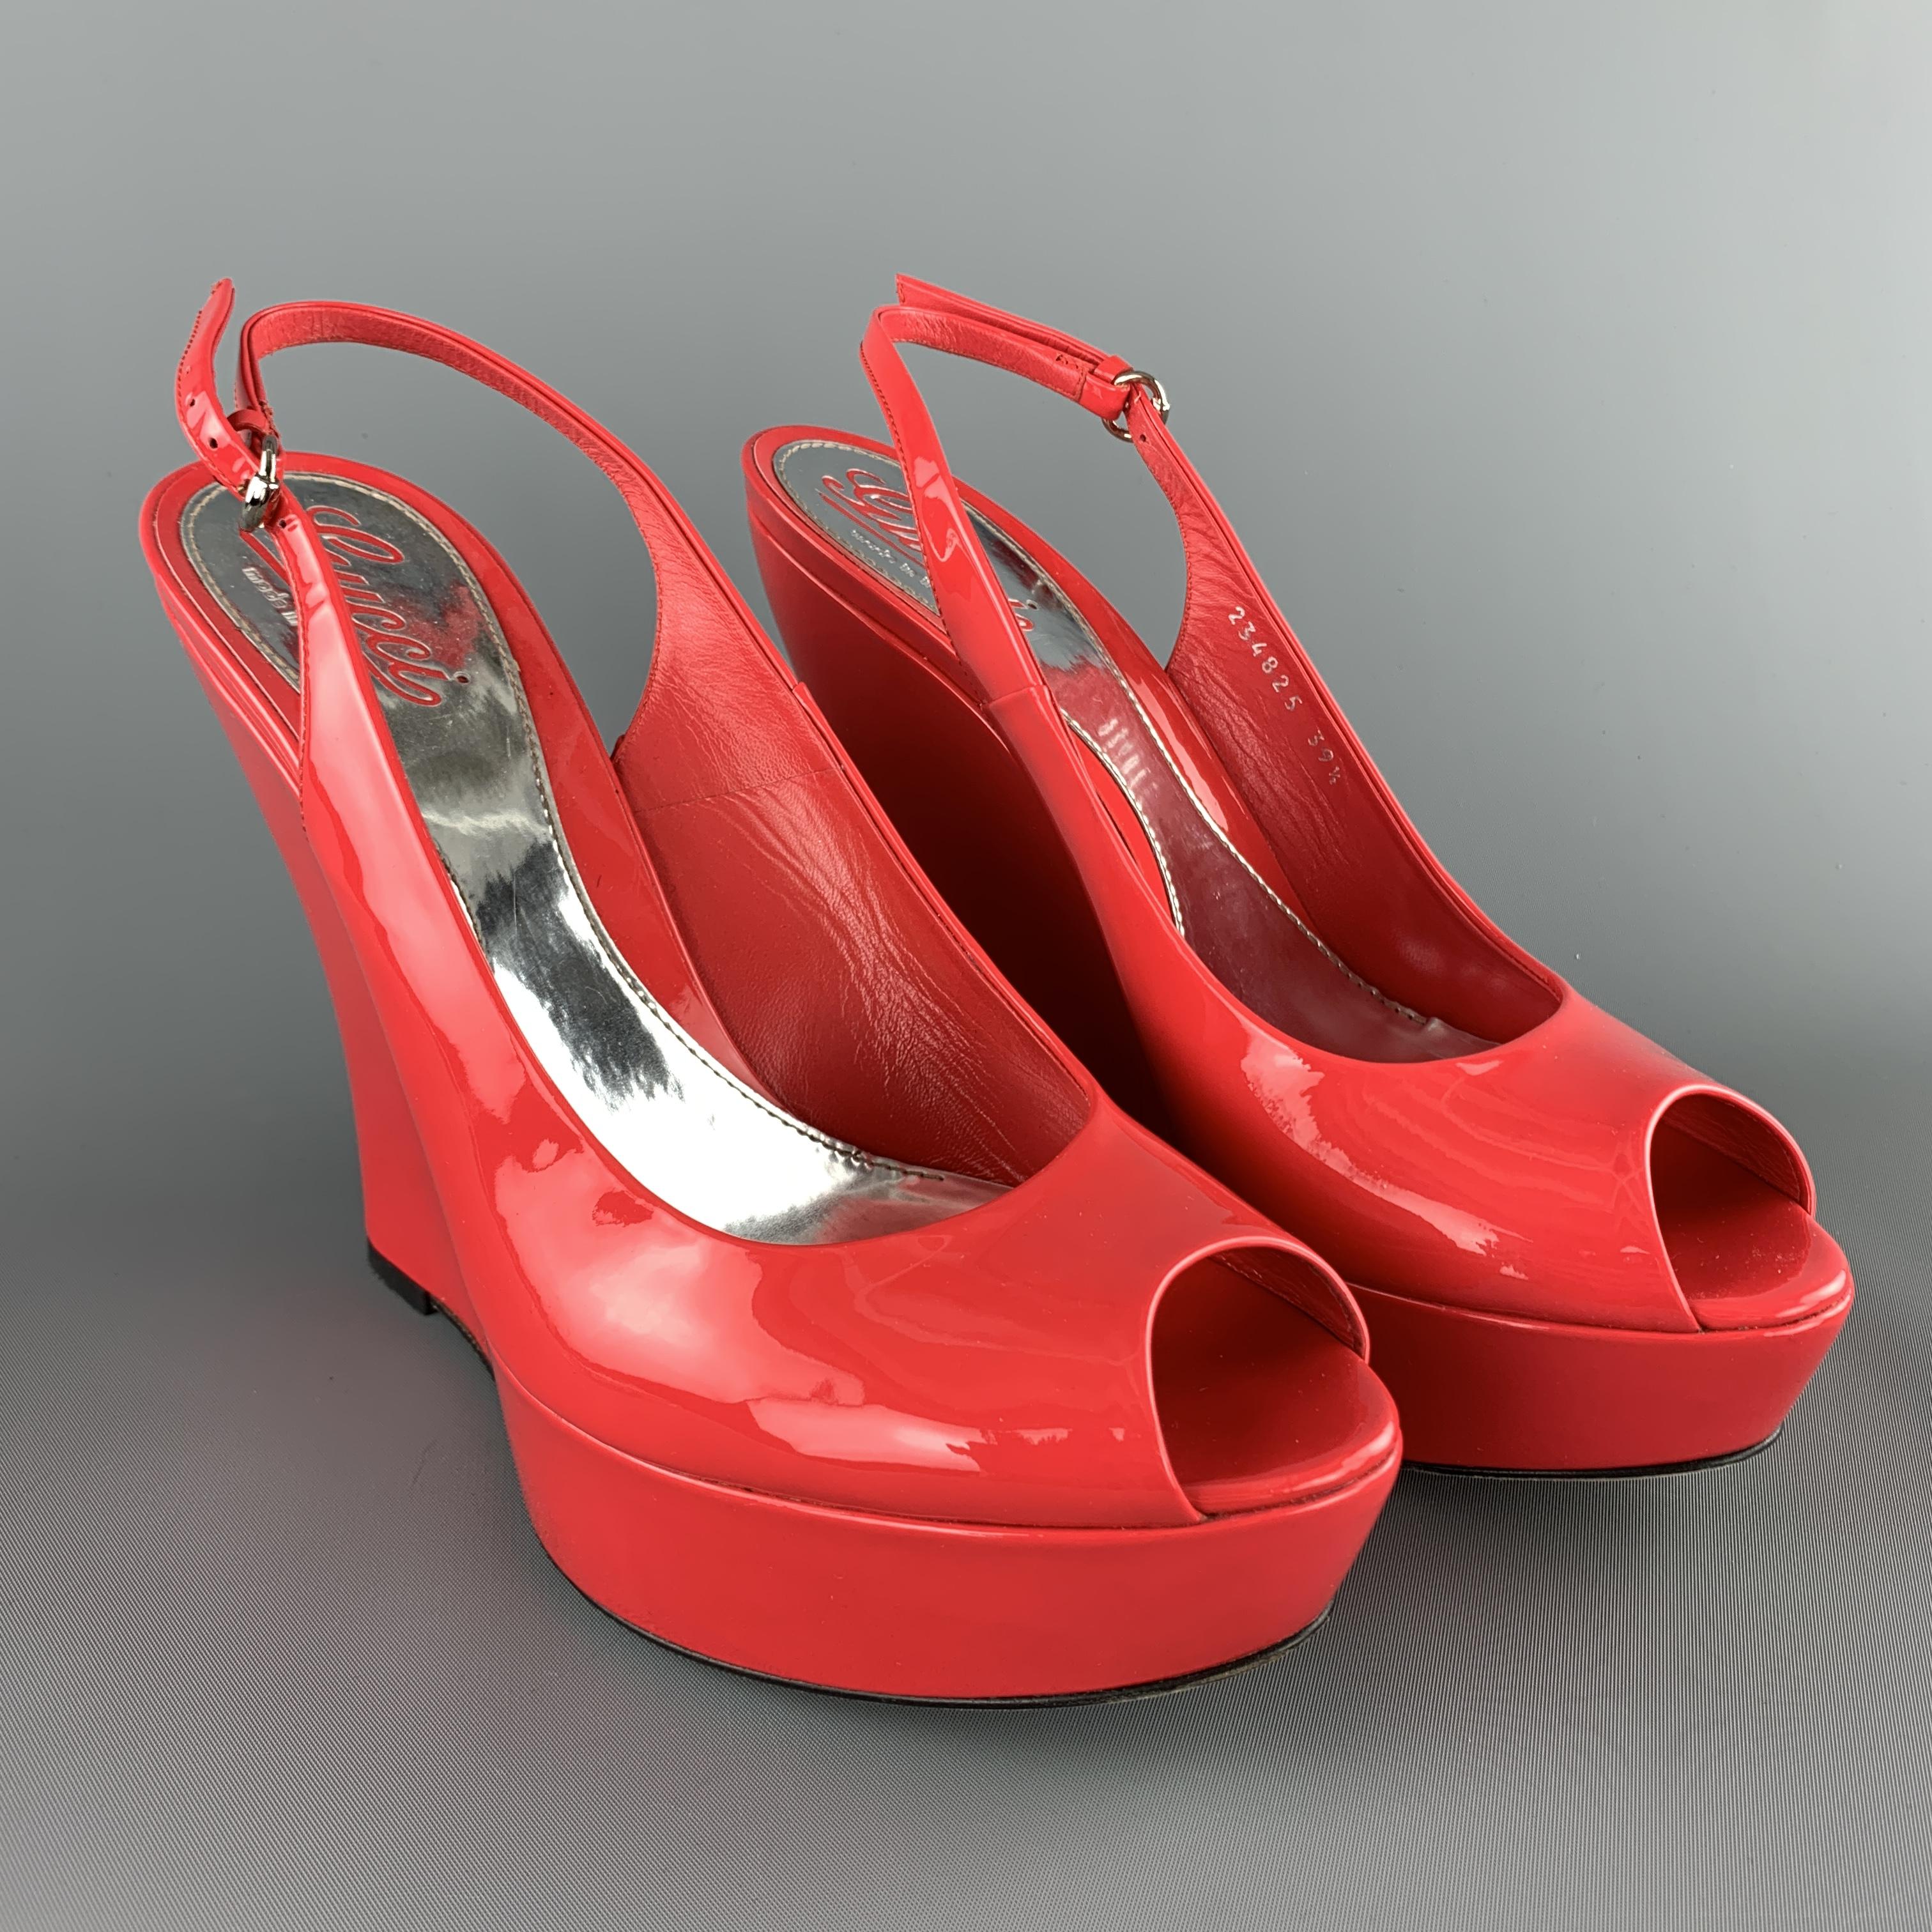 red patent wedges